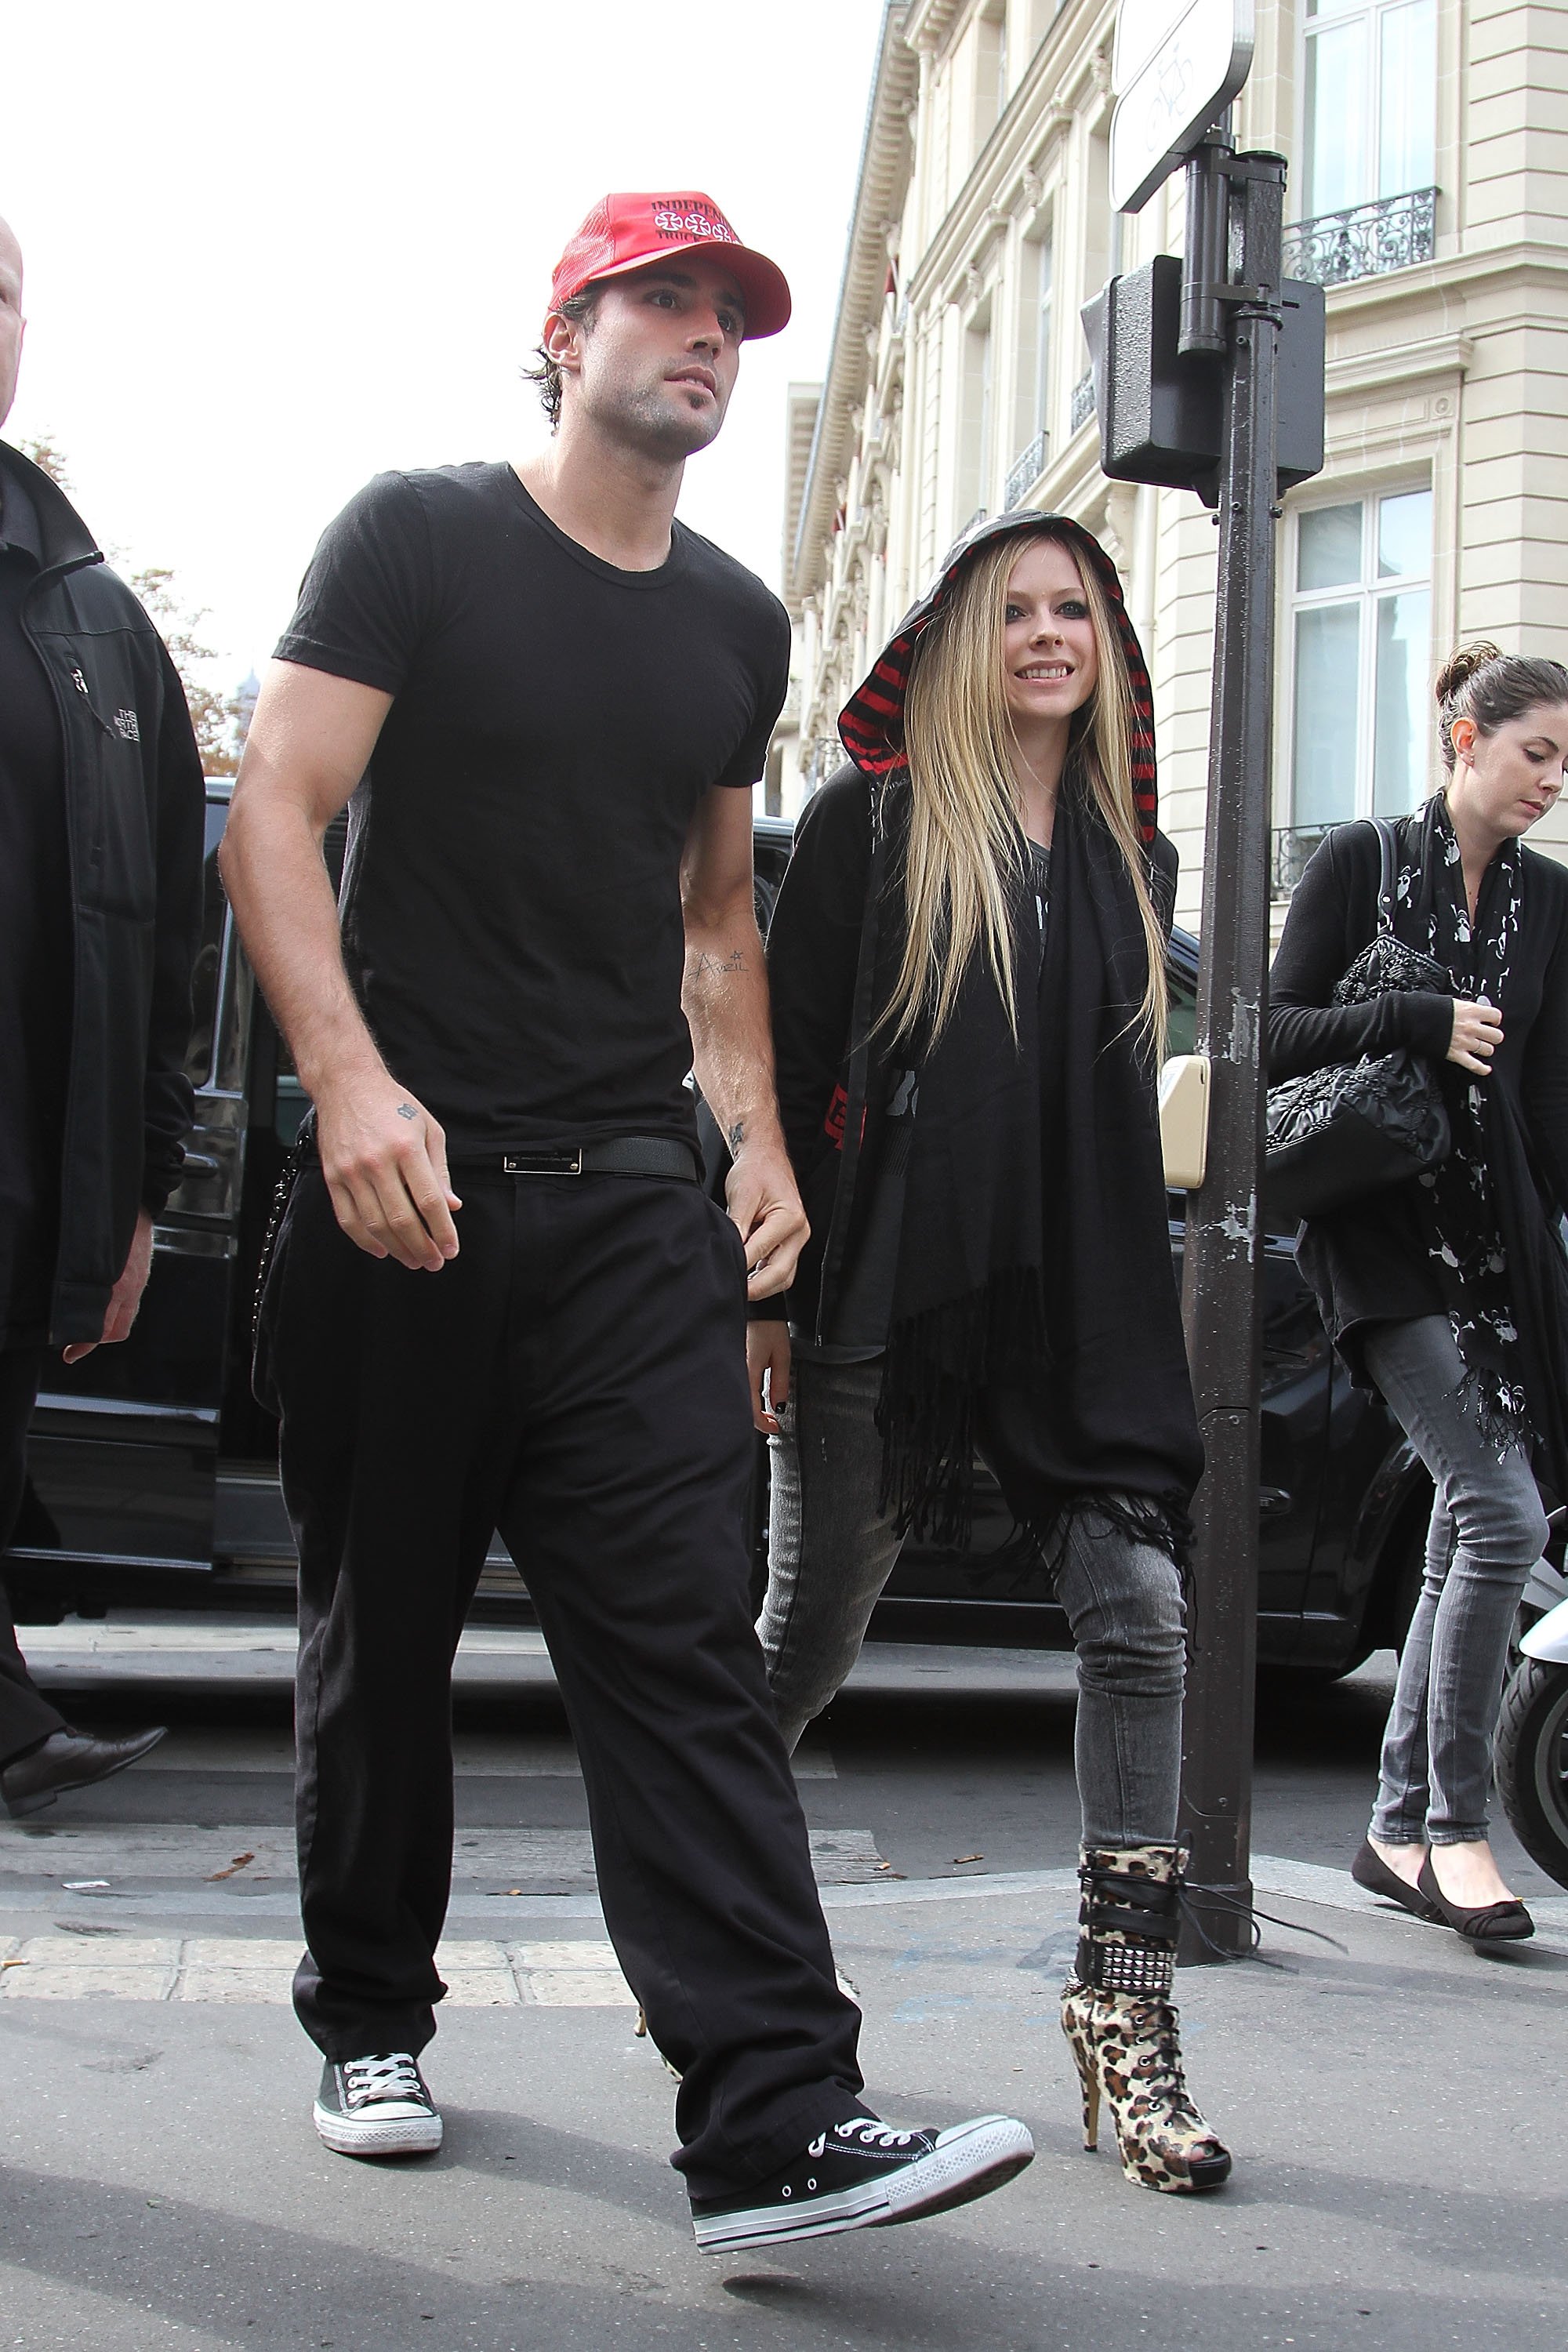 Avril Lavigne and Brody Jenner at the 'L'Avenue' restaurant on September 16, 2011, in Paris, France. | Source: Getty Images